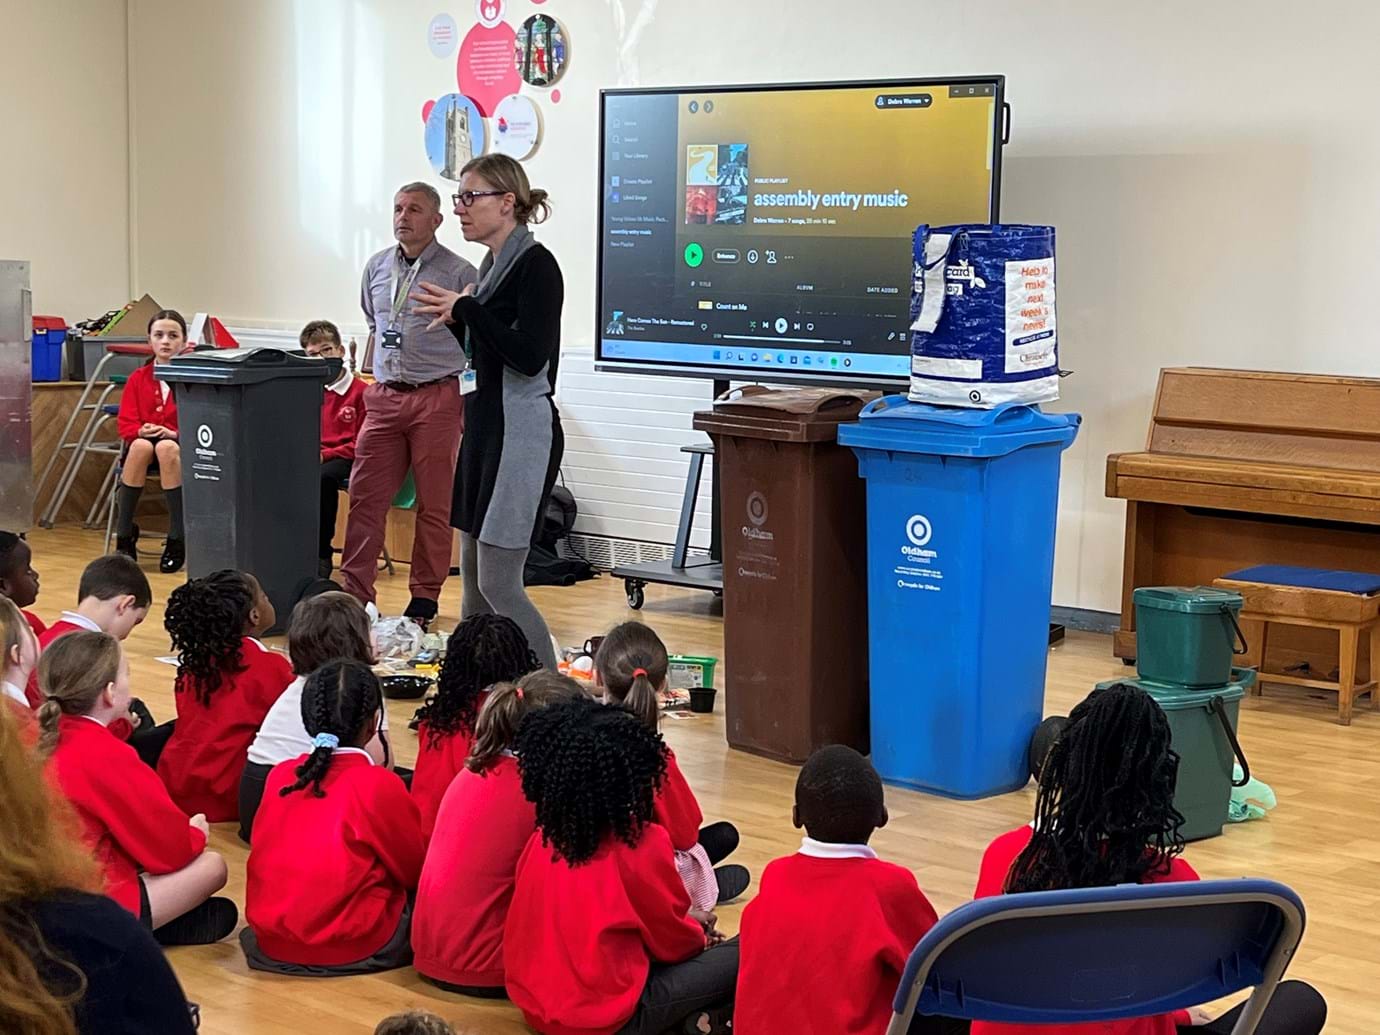 St Thomas’ Moorside CE Primary School pupils learning about learning about recycling and getting rid of waste carefully to help make their neighbourhood cleaner and greener.